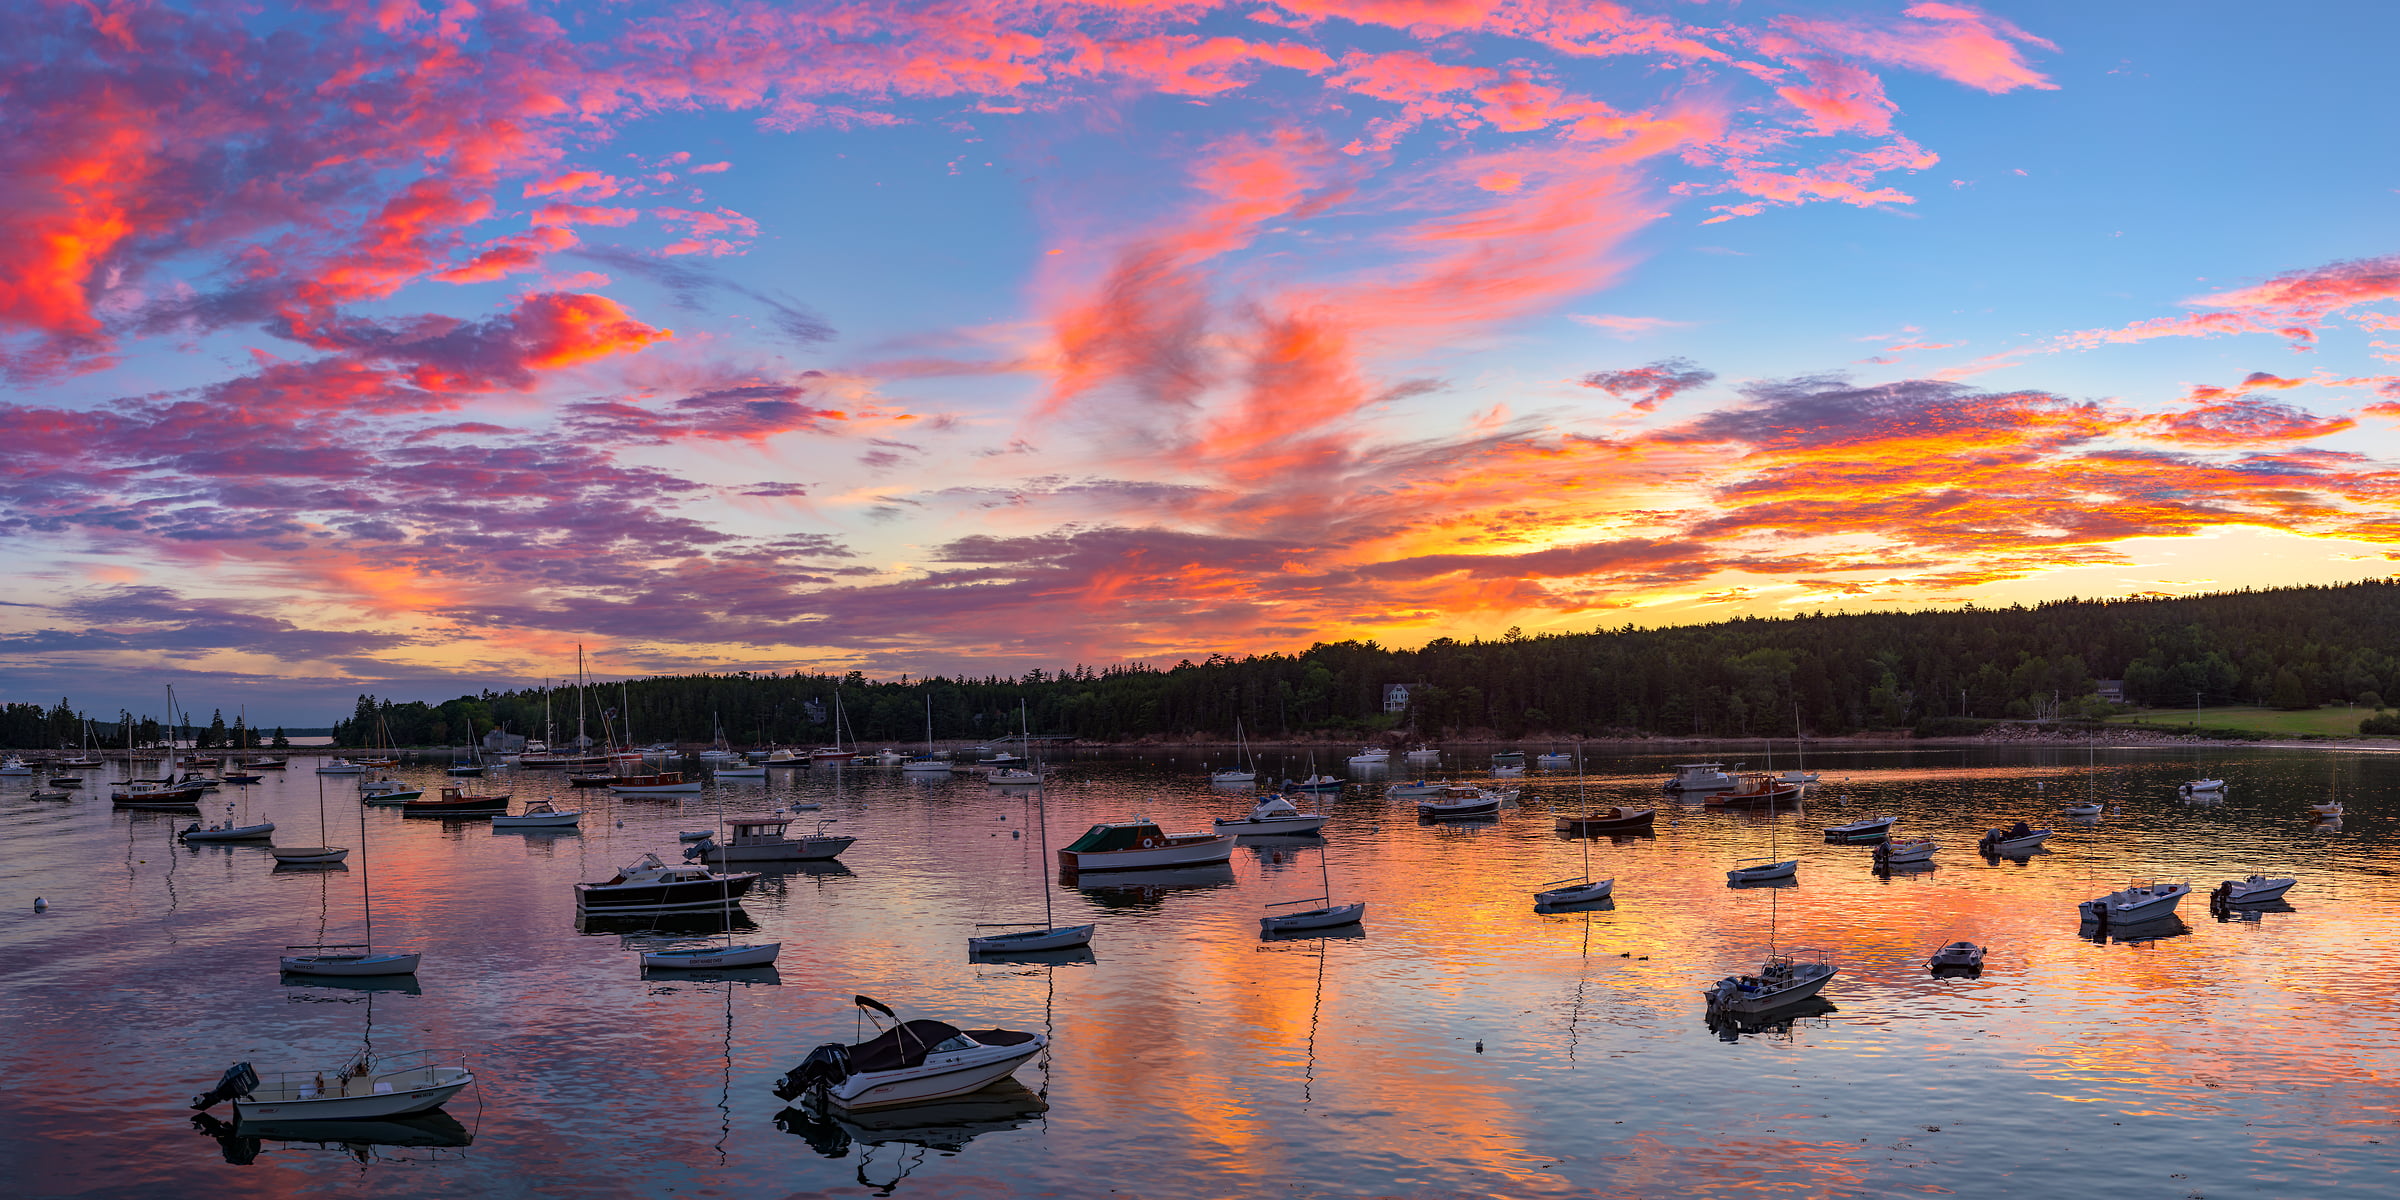 551 megapixels! A very high resolution, large-format VAST photo of a New England harbor with boats at sunset; fine art landscape photograph created by Aaron Priest in Seal Harbor, Maine